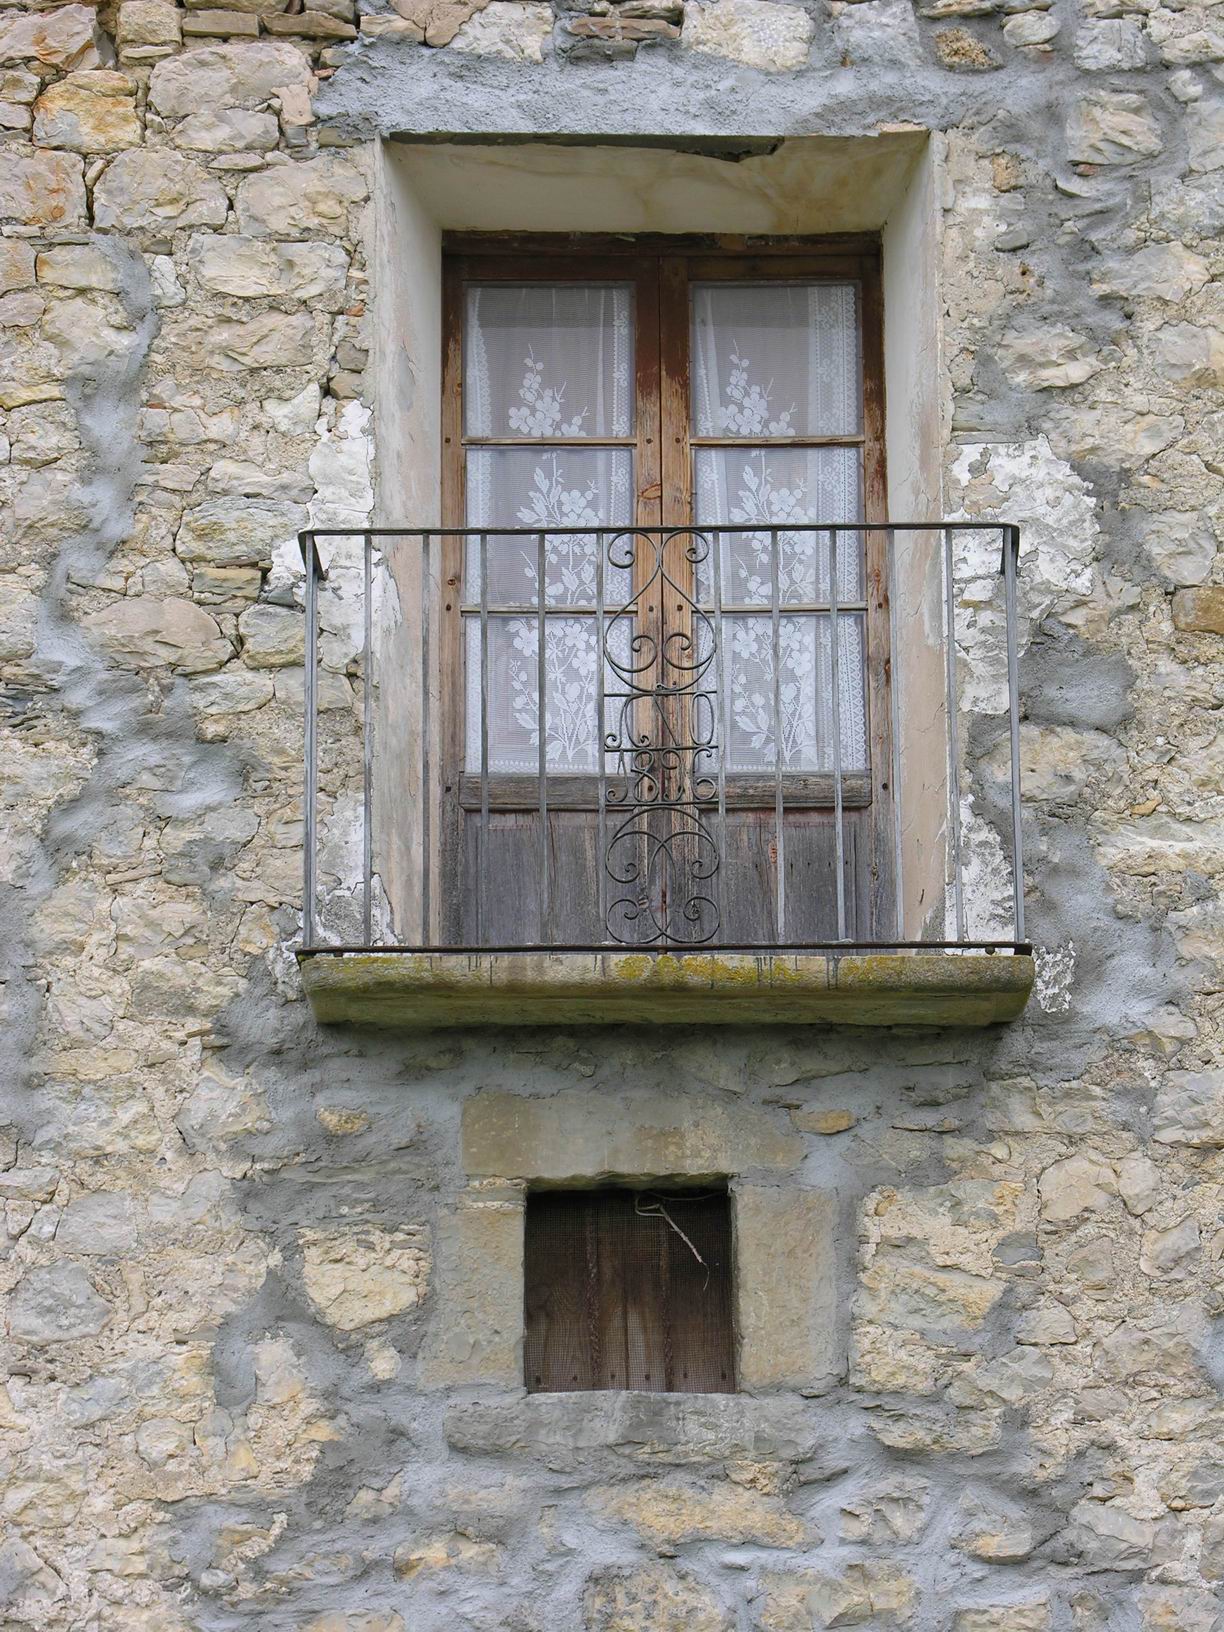 the open window is attached to a stone building